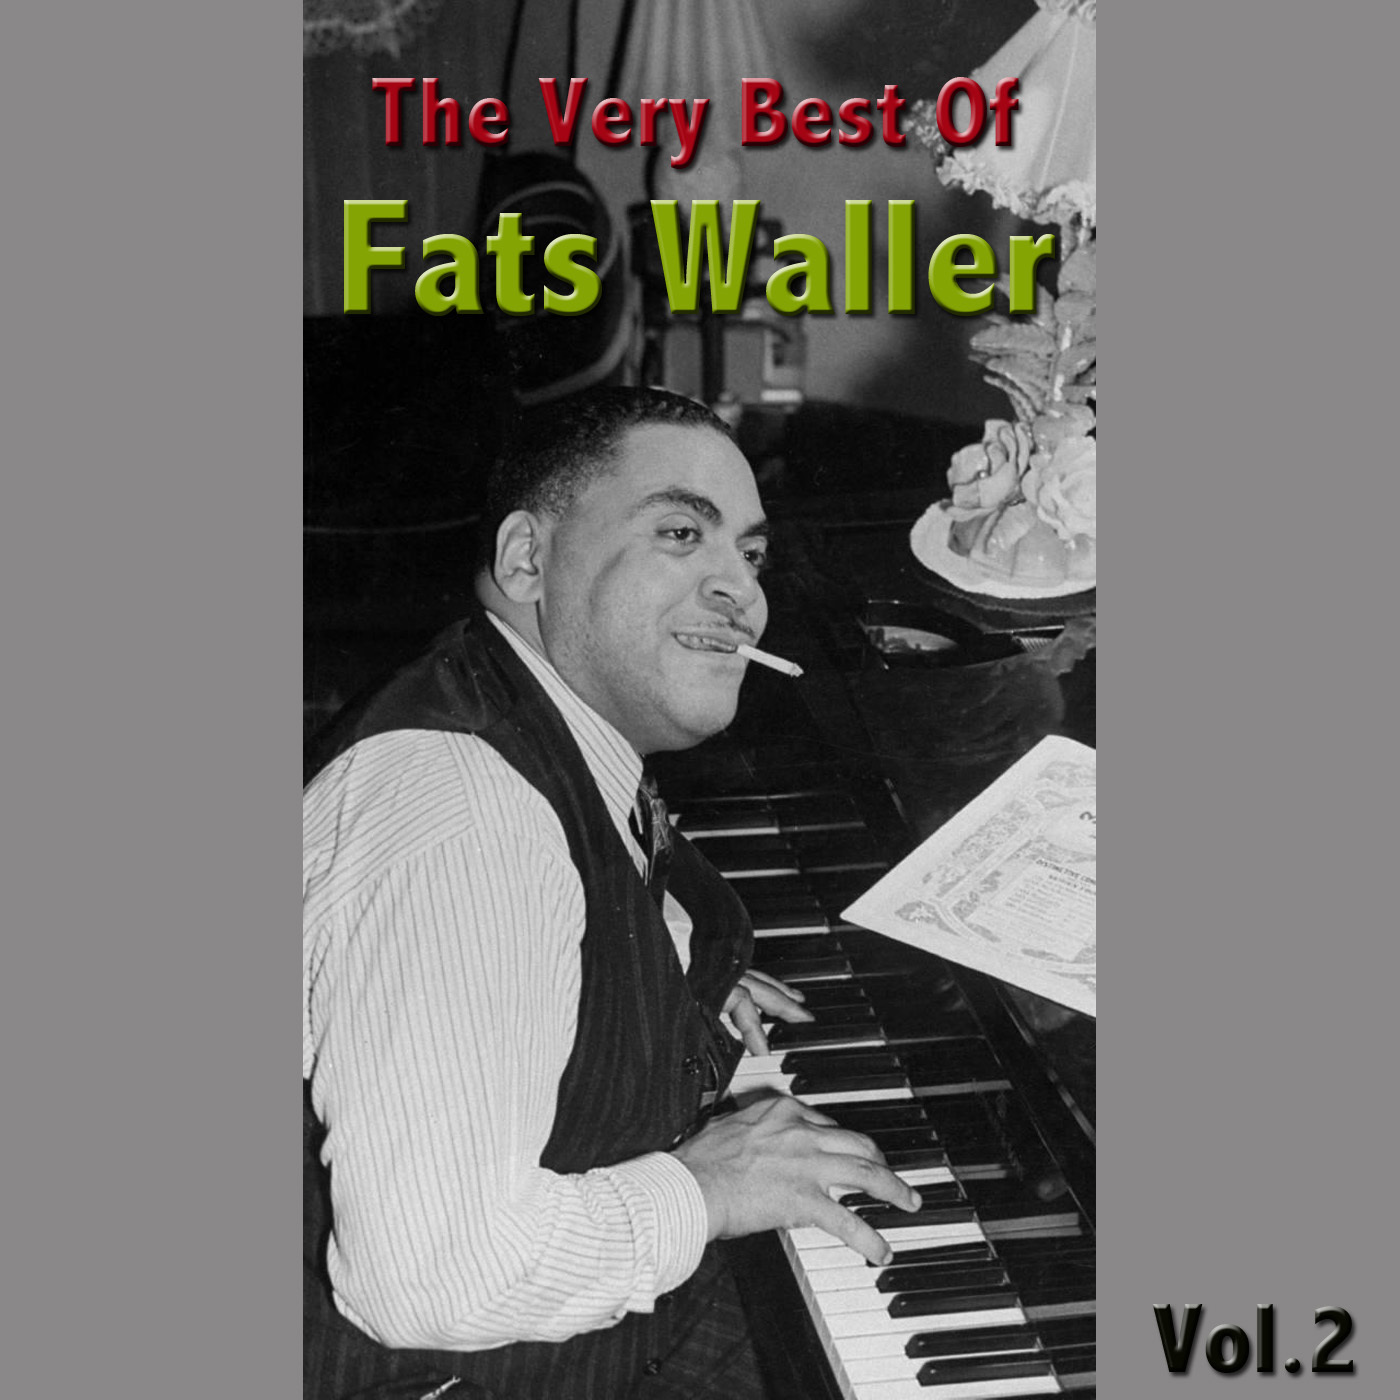 The Very Best Of Fats Waller Vol. 2